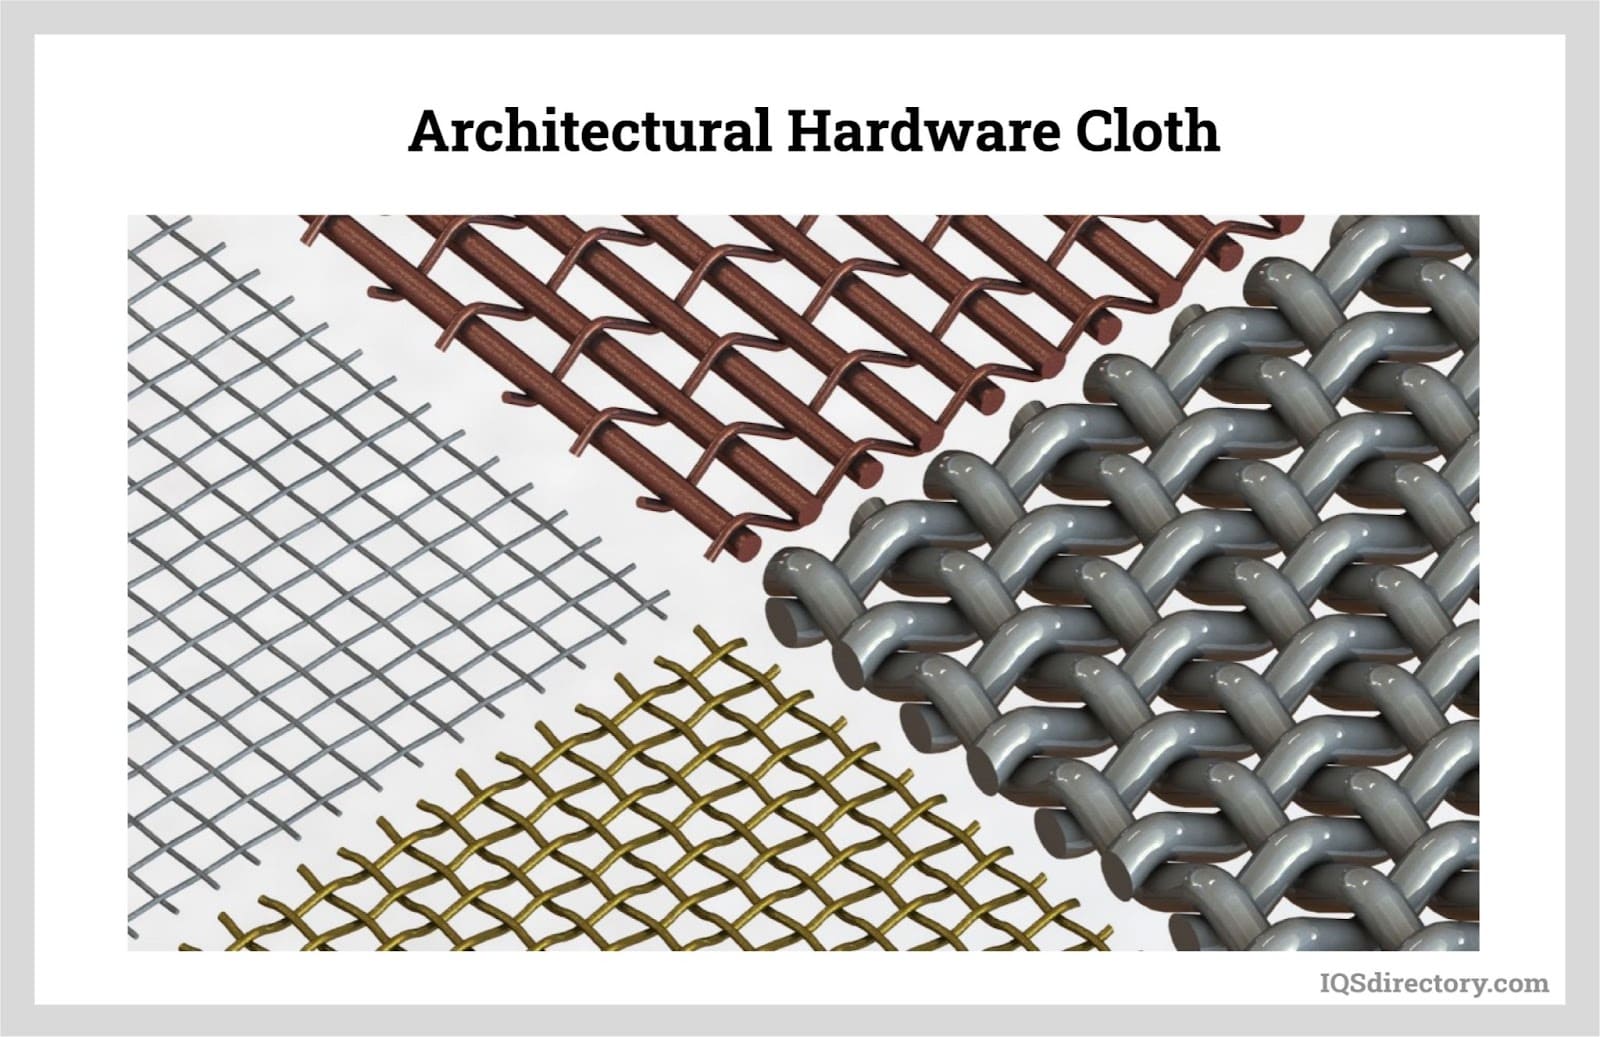 https://www.iqsdirectory.com/articles/wire-mesh/hardware-cloth/architectural-hardware-cloth.jpg